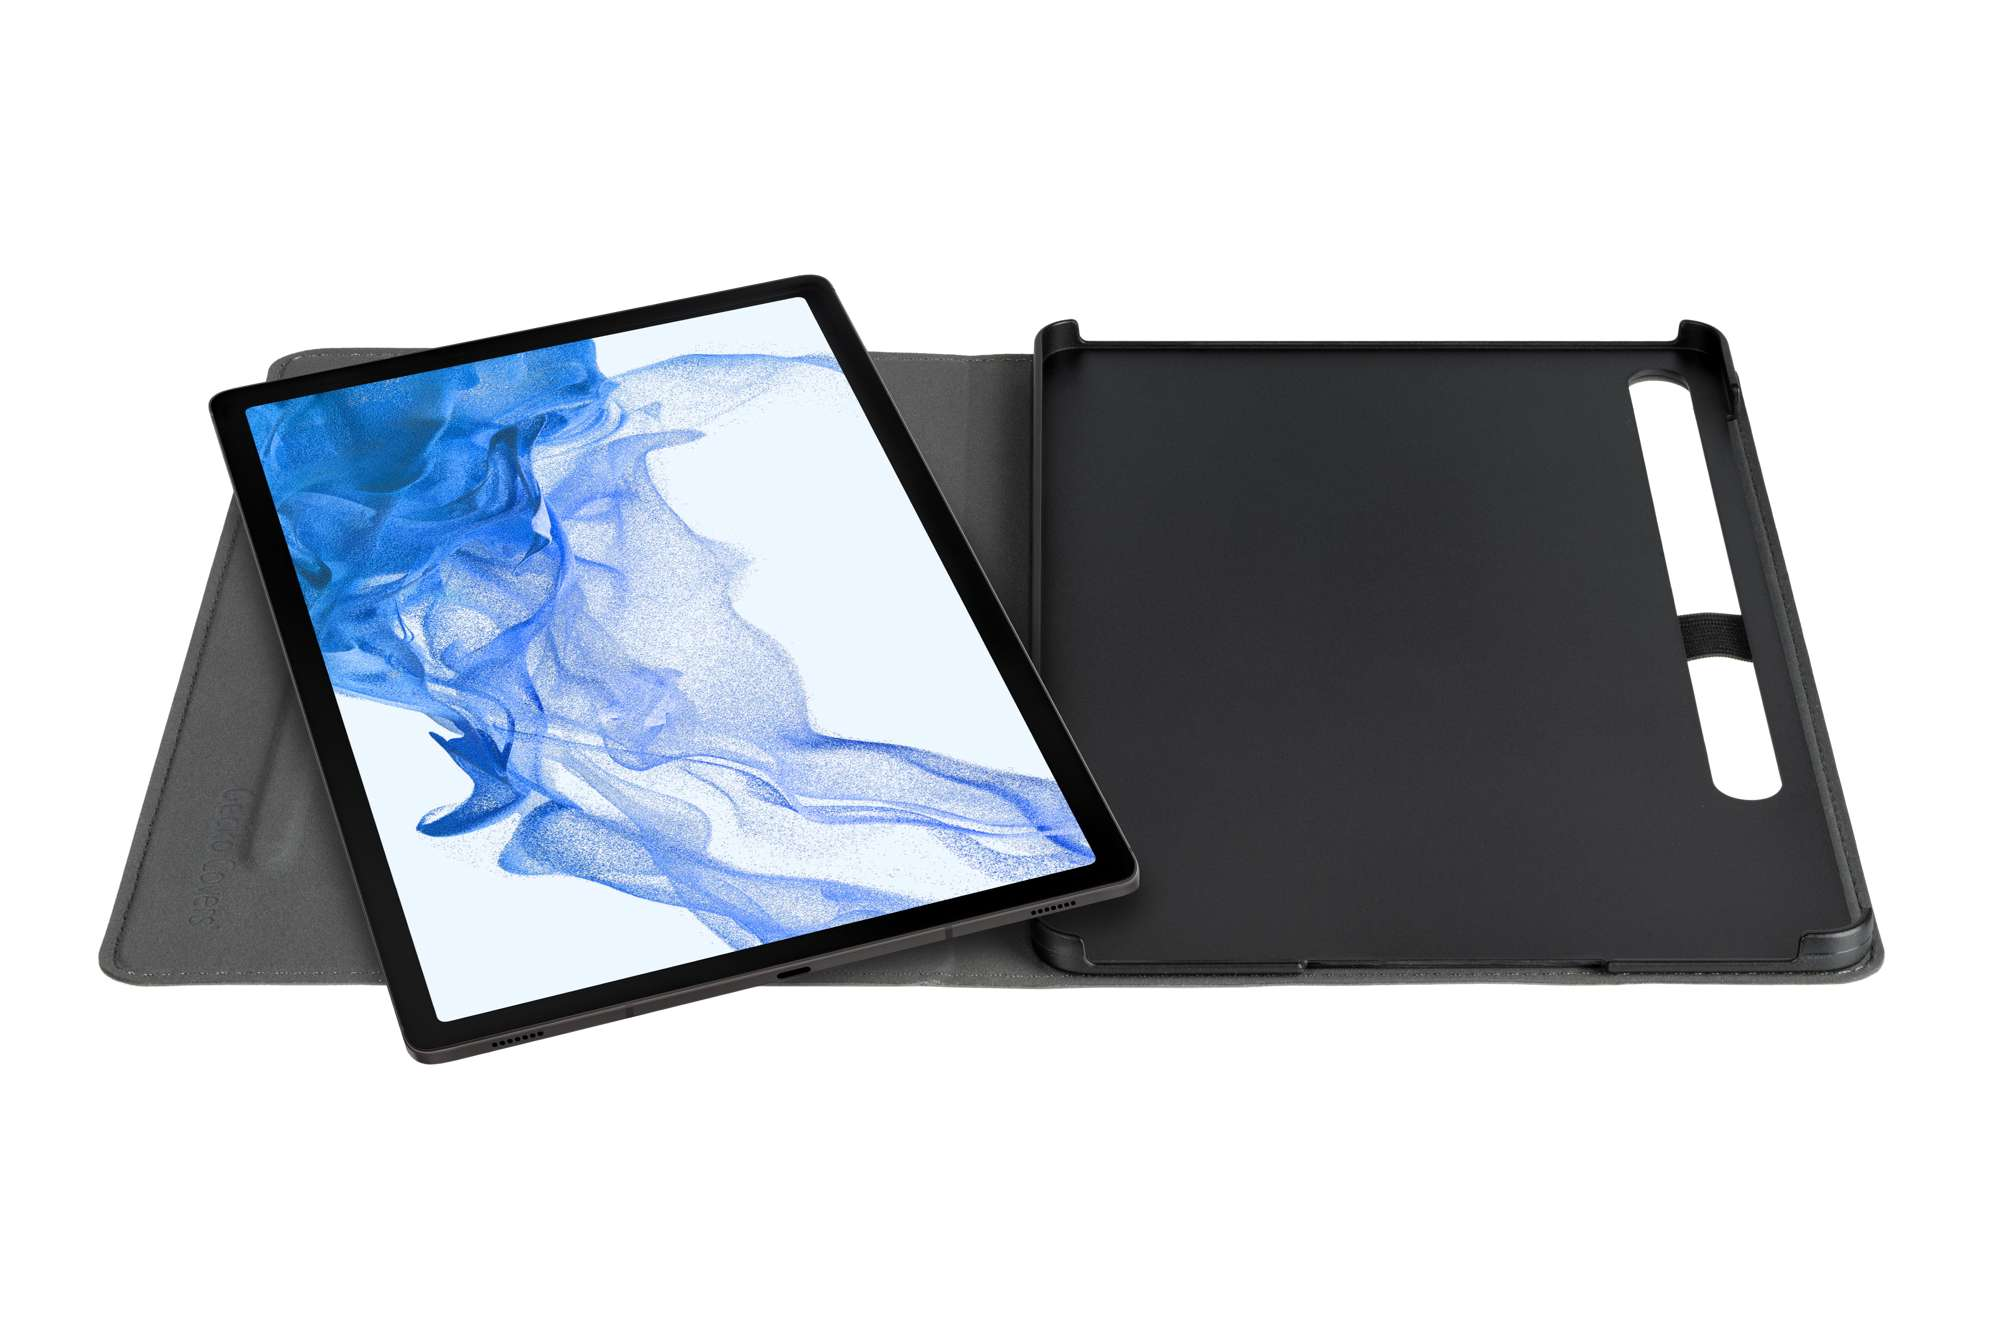 GECKO COVERS Easy-Click Samsung Leather, Tablet Black Hülle für 2.0 Bookcover PU